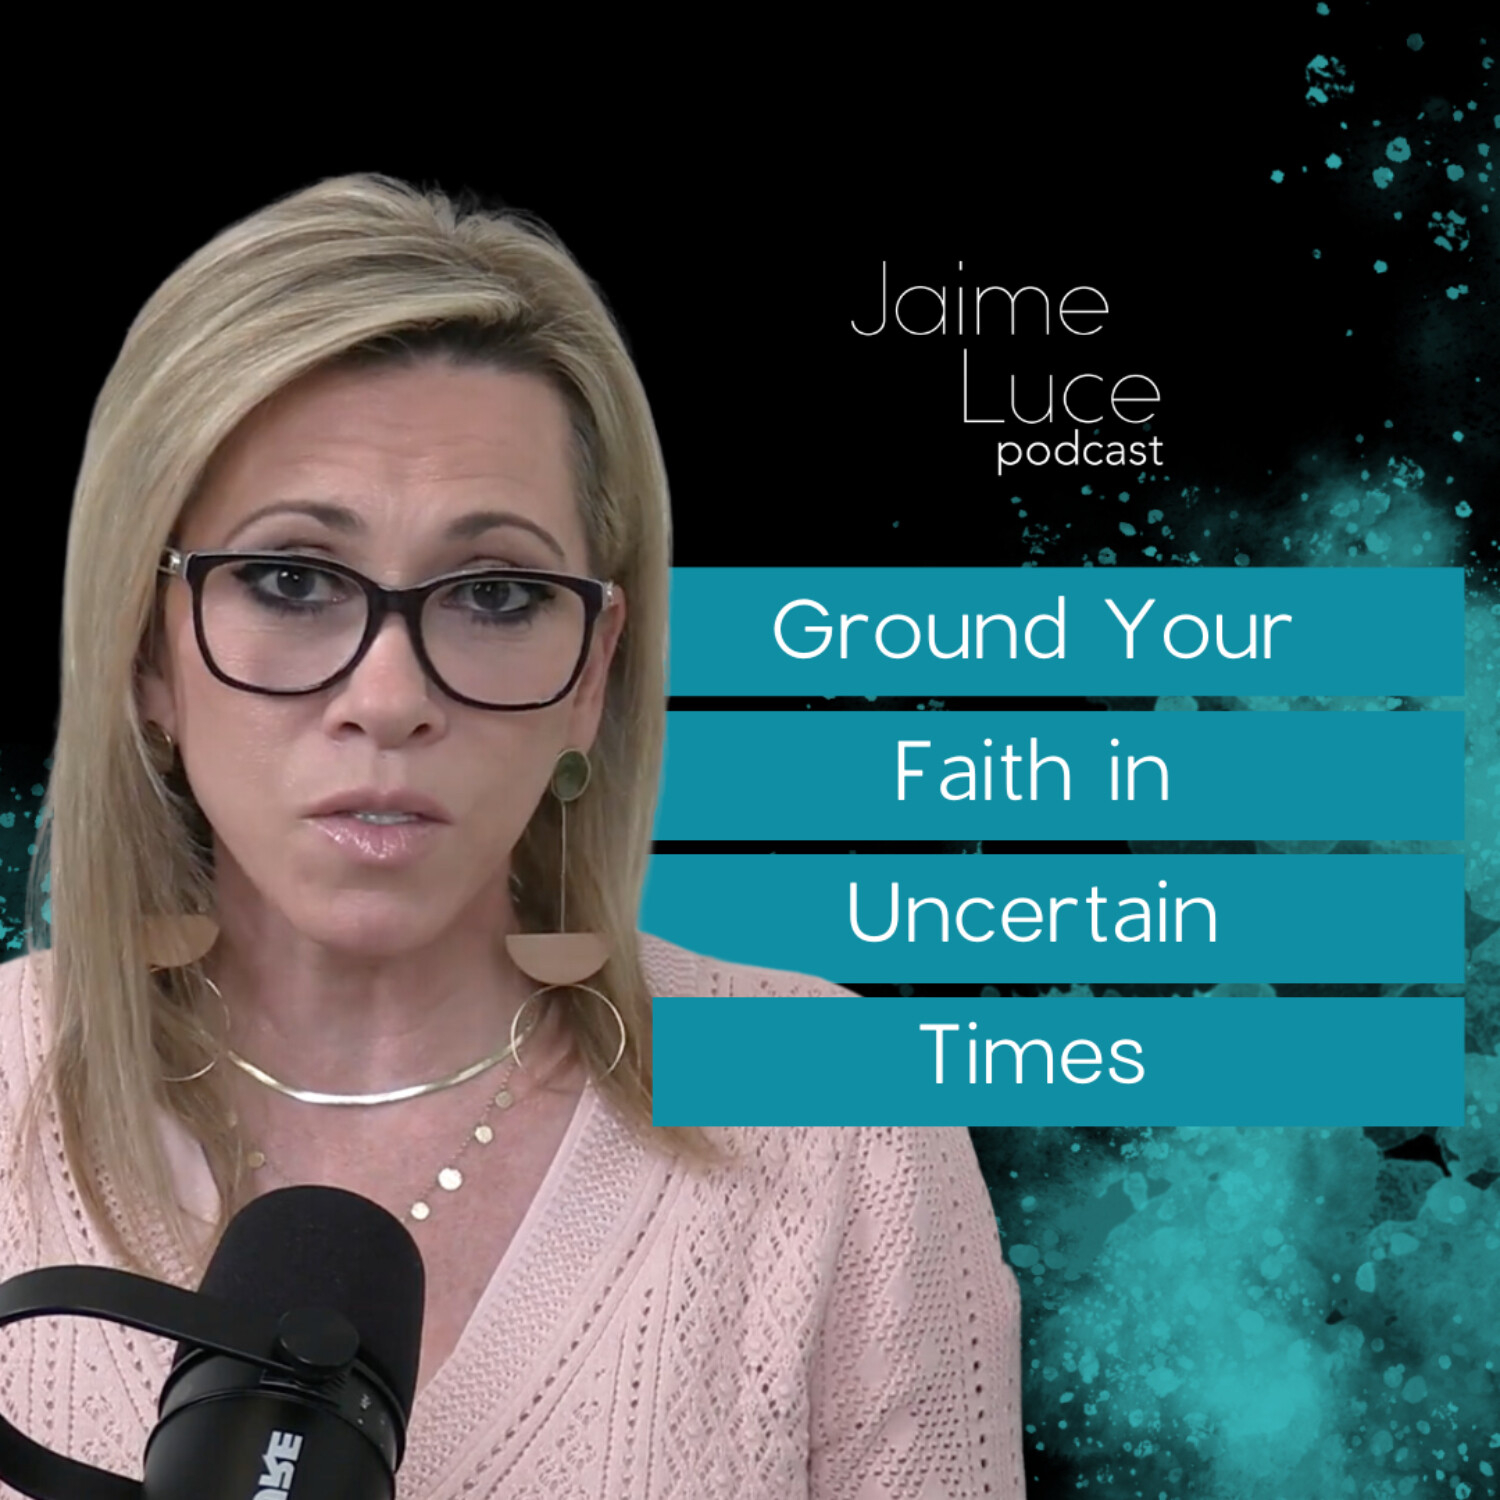 Ground Your Faith in Uncertain Times